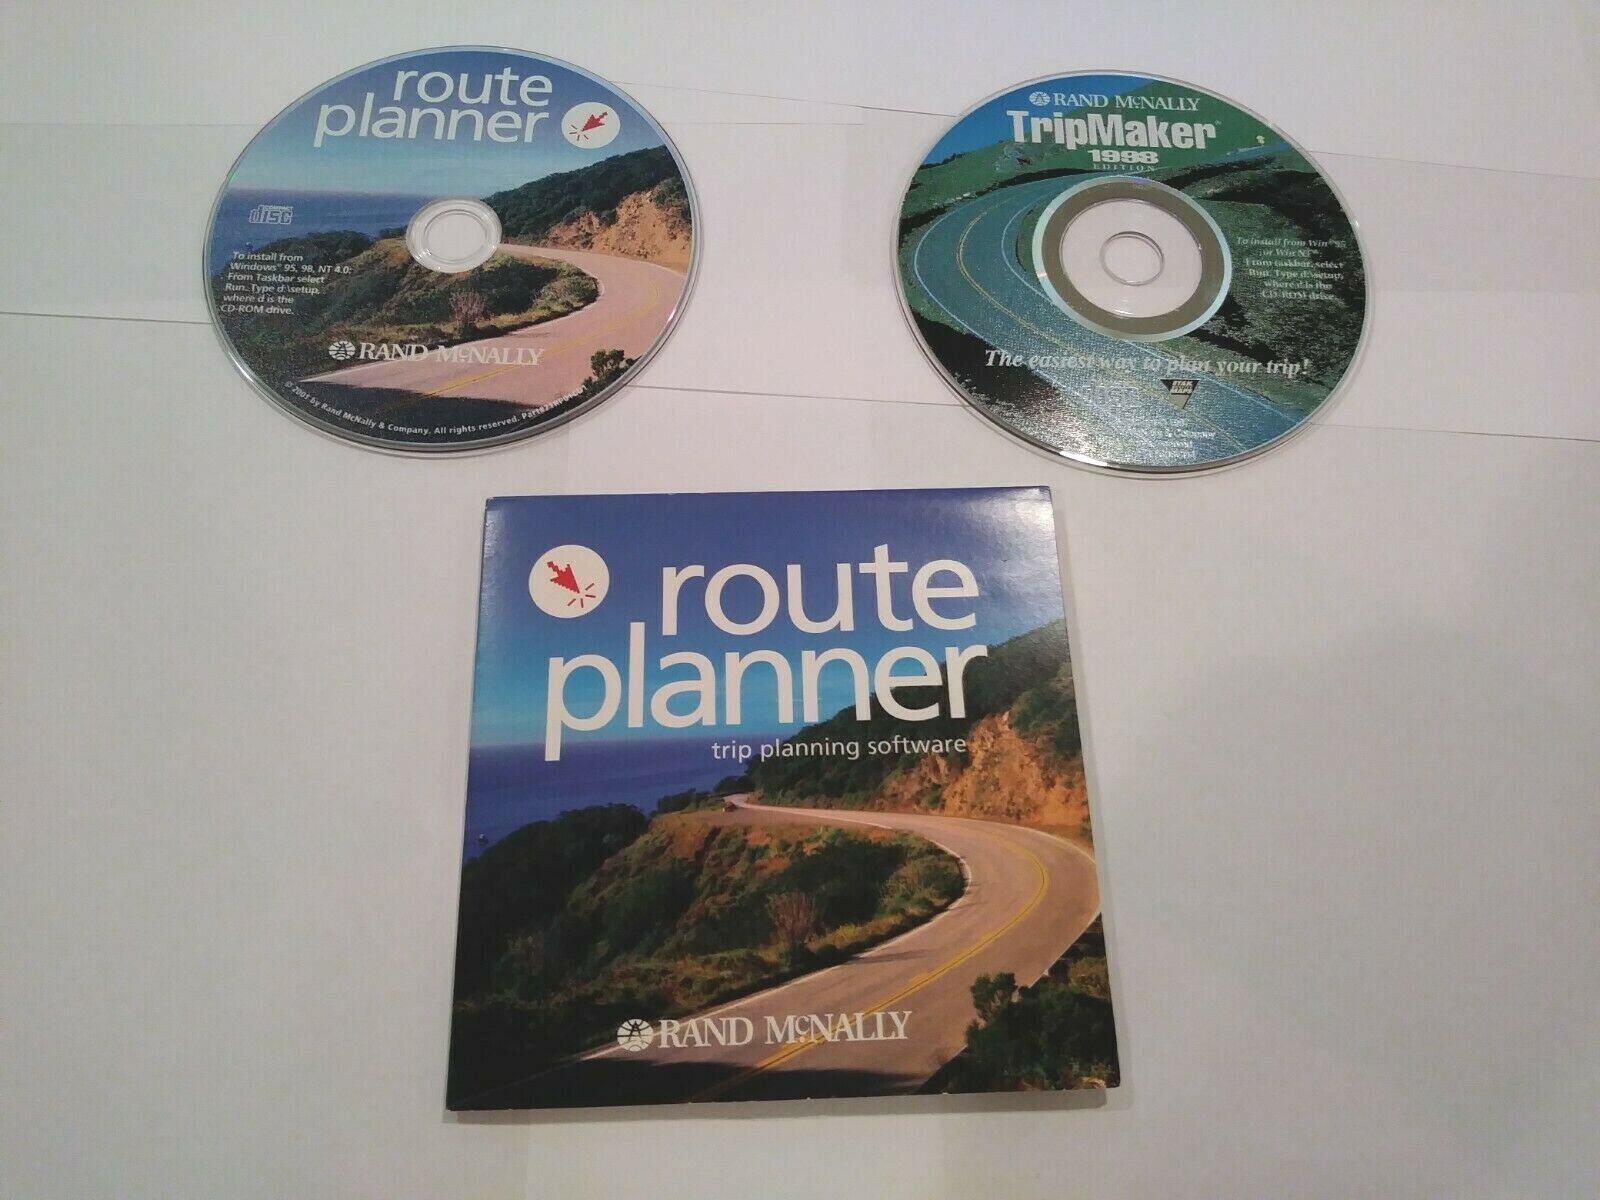 Rand McNally Tripmaker 1998 & Route Planner, Win 95/98/NT/Me/2000, PC CD-ROM